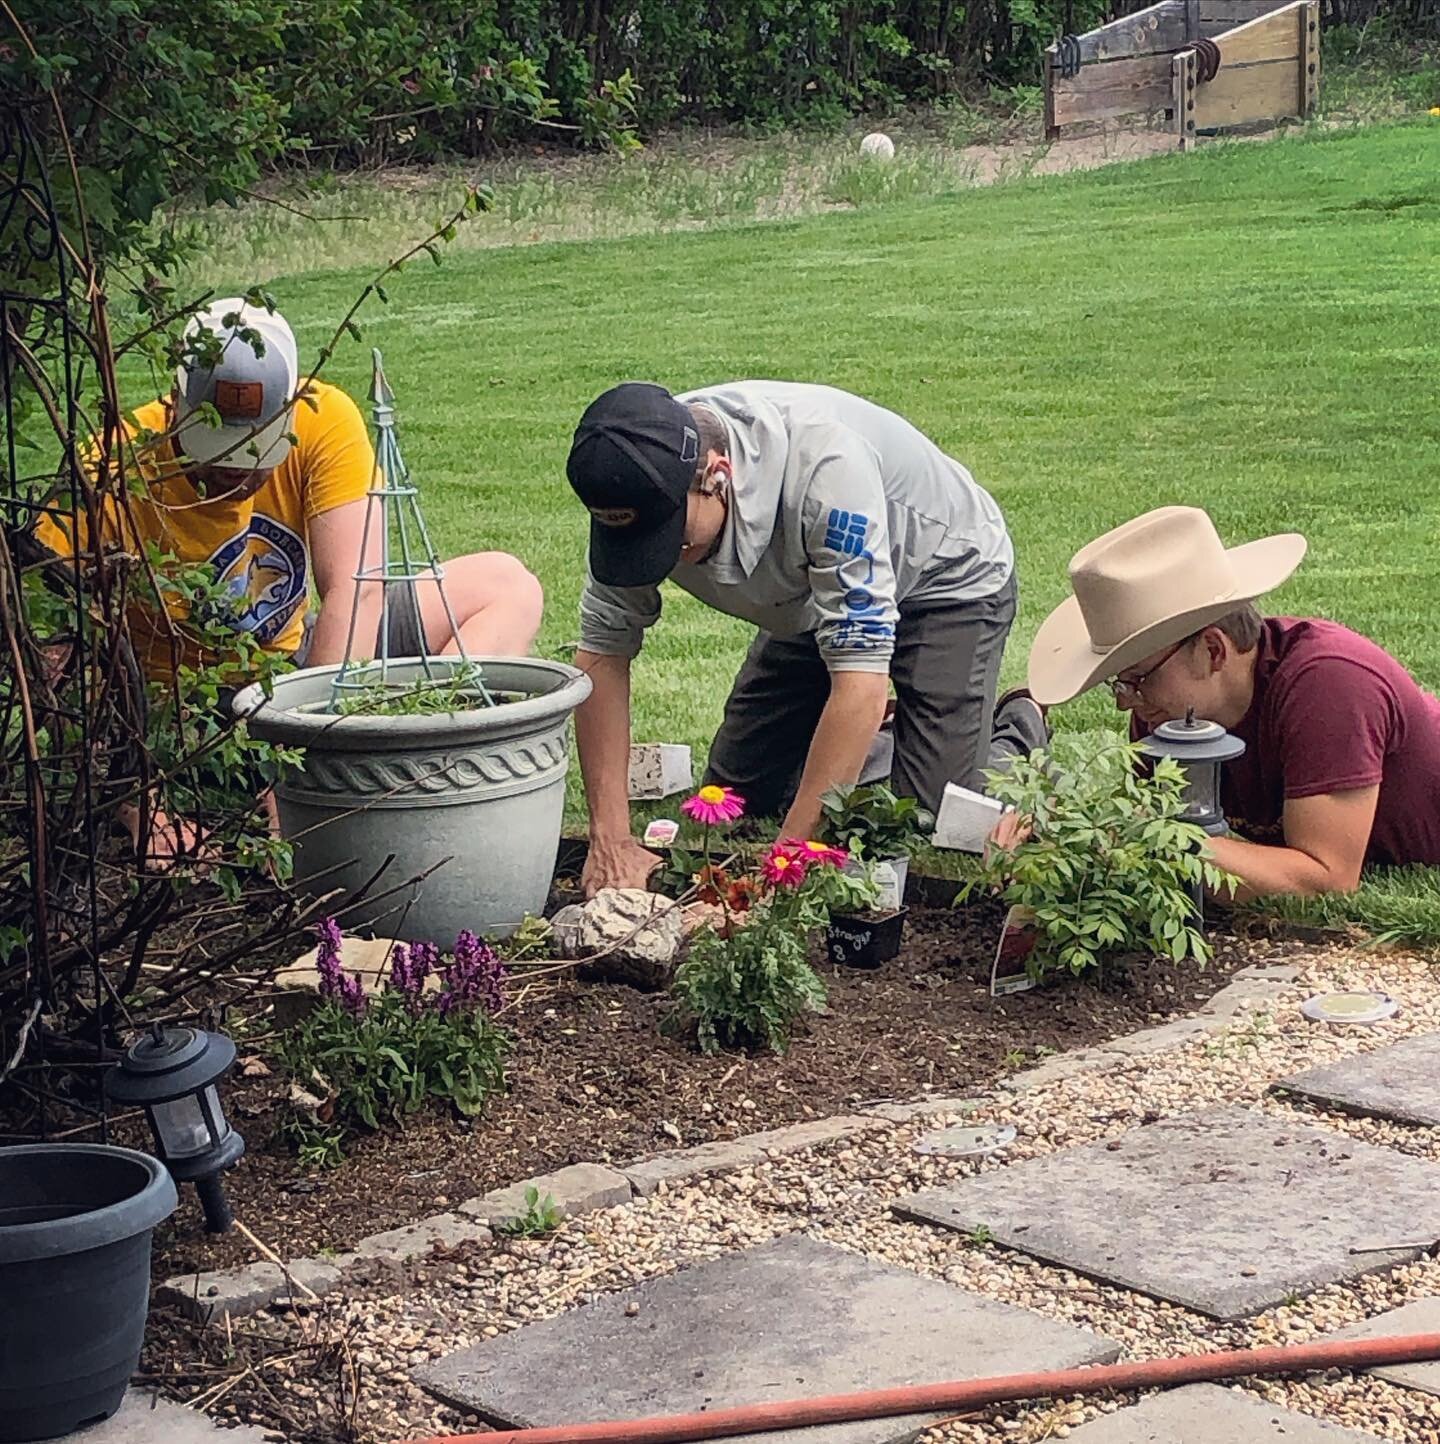 What&rsquo;s a farm mama get for Mother&rsquo;s Day? All three sons home and planting flowers and trees together!! THE best gift ever! 💗

#growinguponafarm #threesons #turnerboys #thebrothers #mothersdaygift #mamasheartisfull